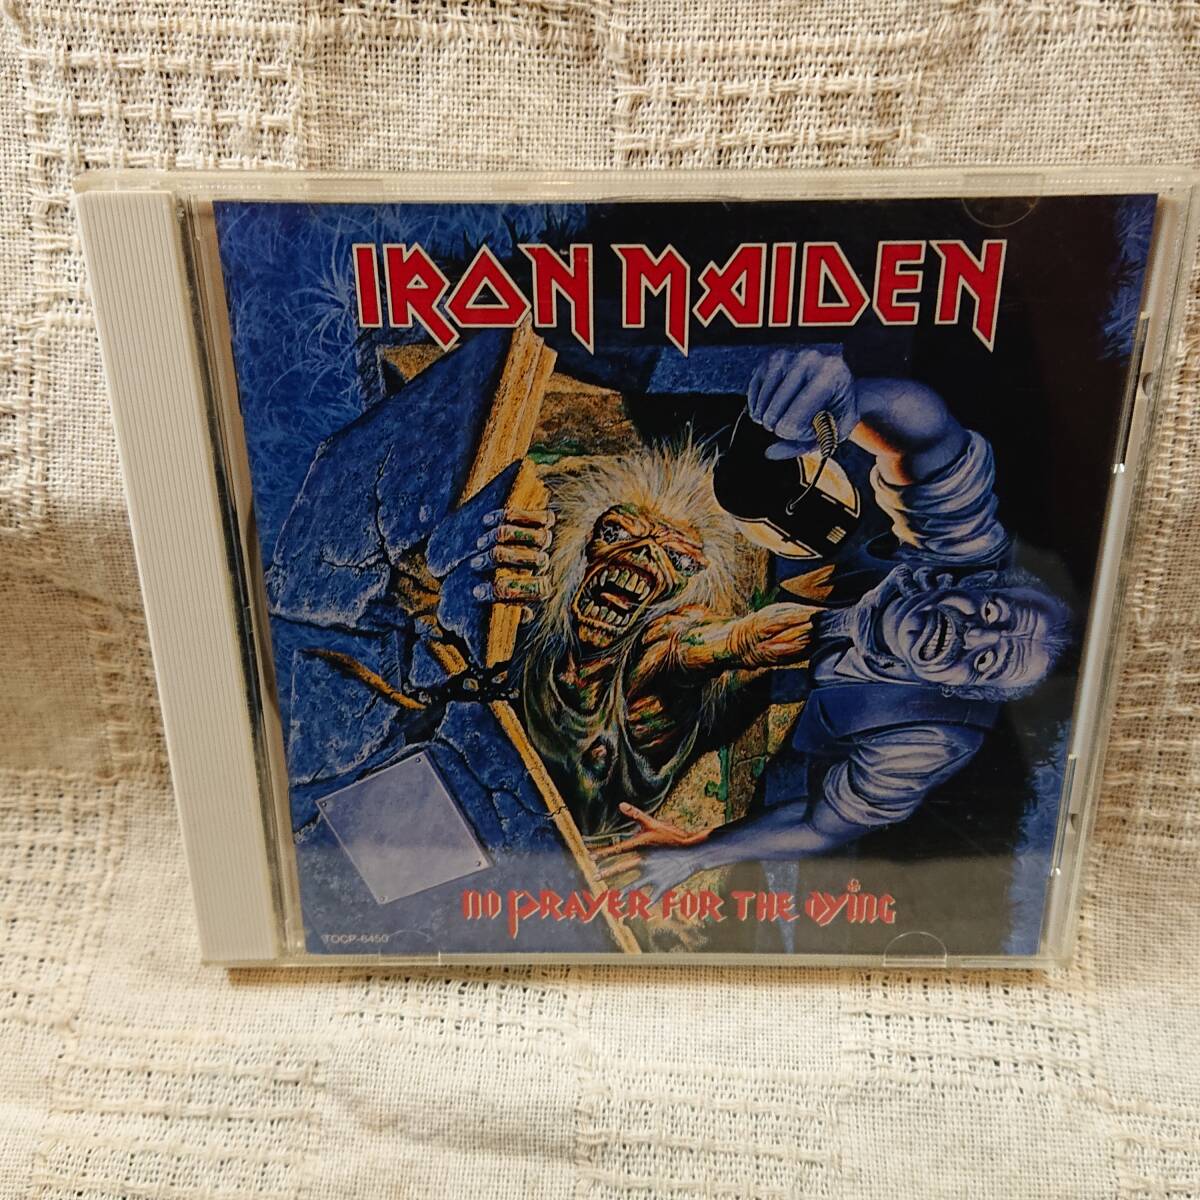 Iron Maiden No Prayer For The Dying　アイアン・メイデン　美品　CD 　送料定形外郵便250円発送 [Af]_画像1